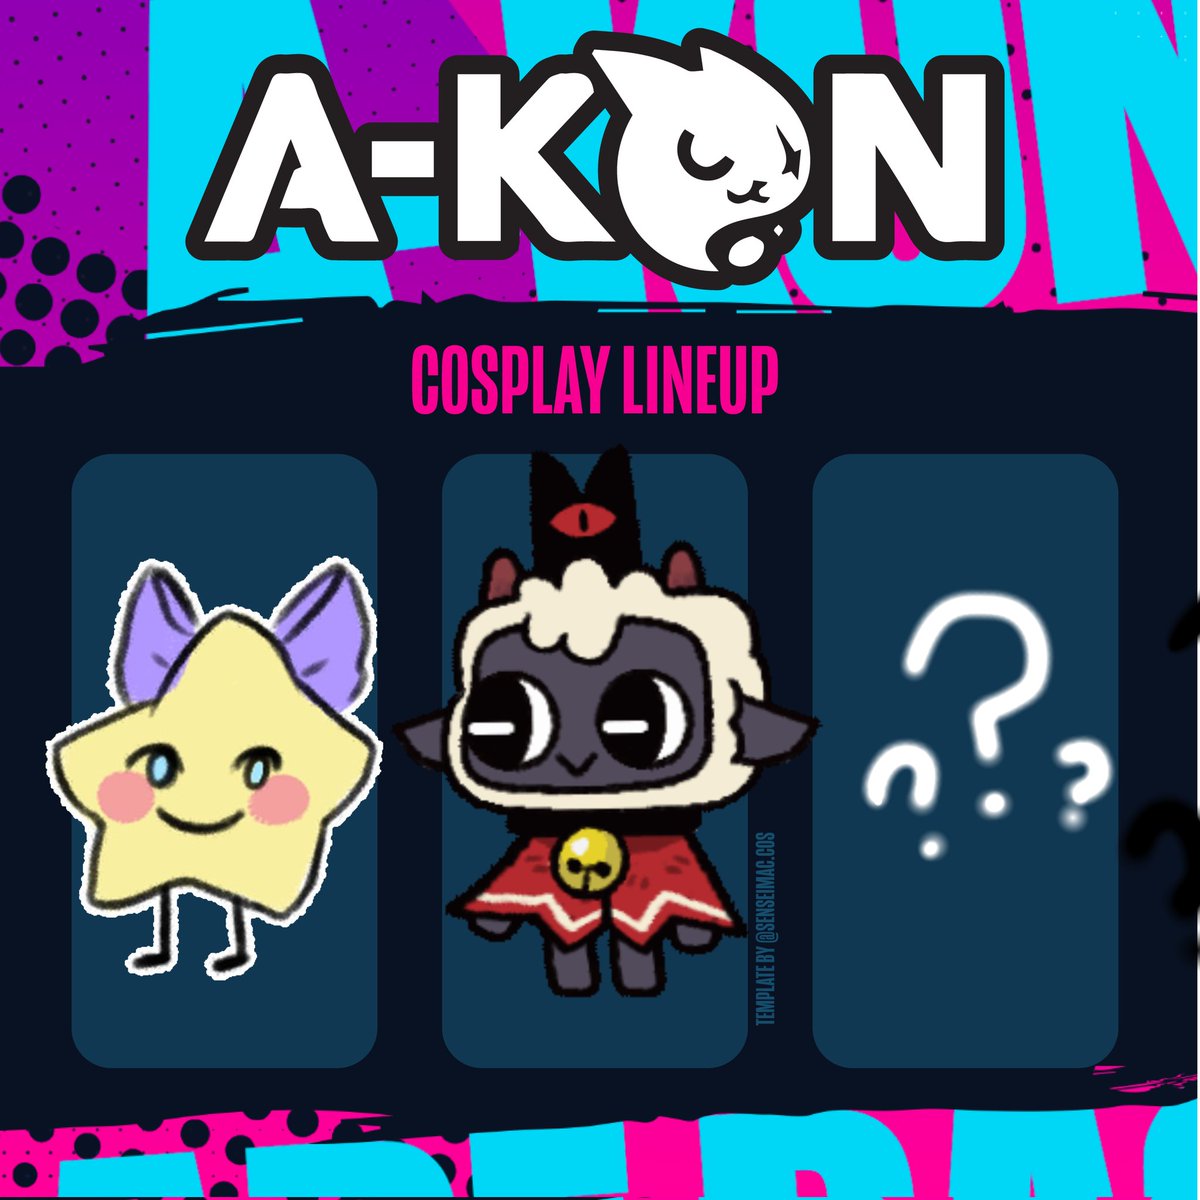 ITS CONVENTION TIME BABEEYY
PEEP THE COSPLAY LIST!!!
I HOPE TO SEE YOU THERE

#AKON23 #EPISODE23 #AKON2023 #ANIMEUNCHAINED